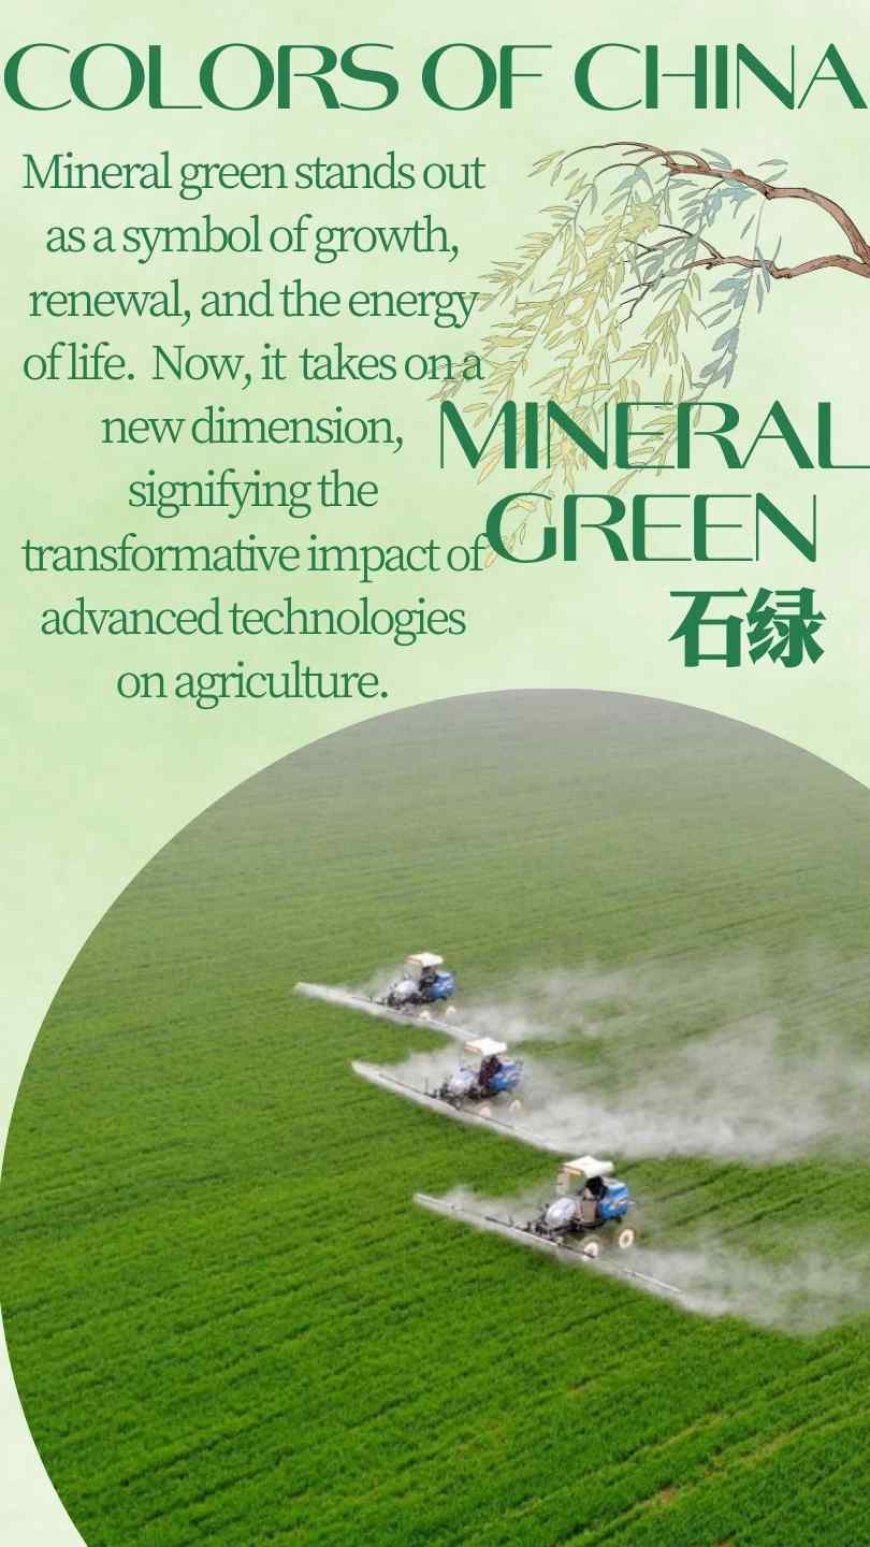 In China’s countryside, mineral green signifies agricultural innovation